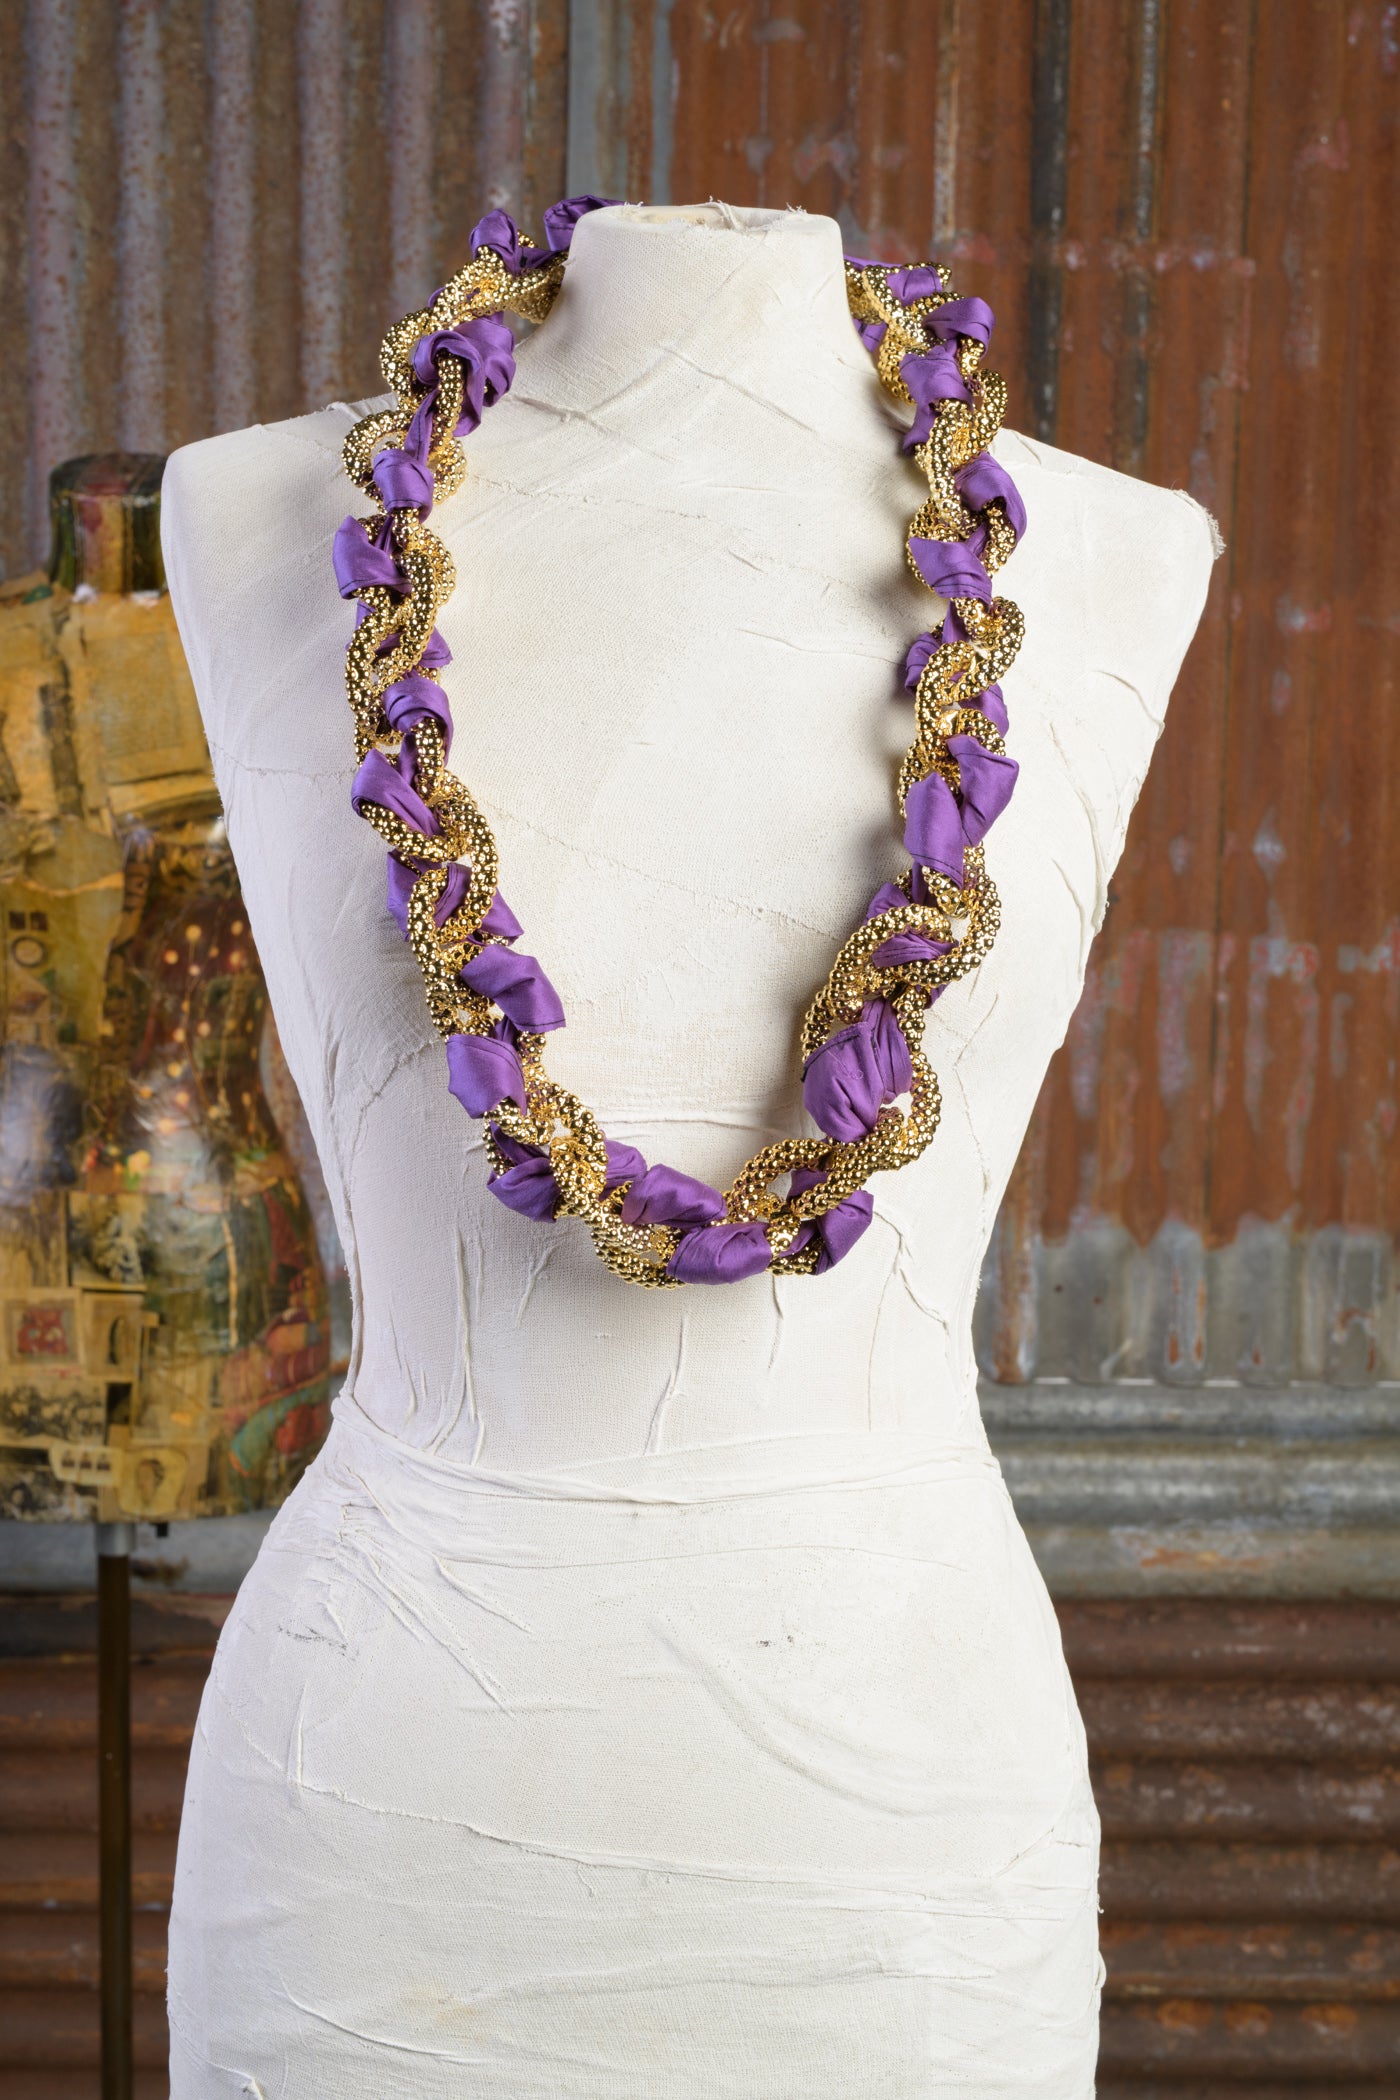 Double Twisted Necklace with Interwoven Chain and Silk